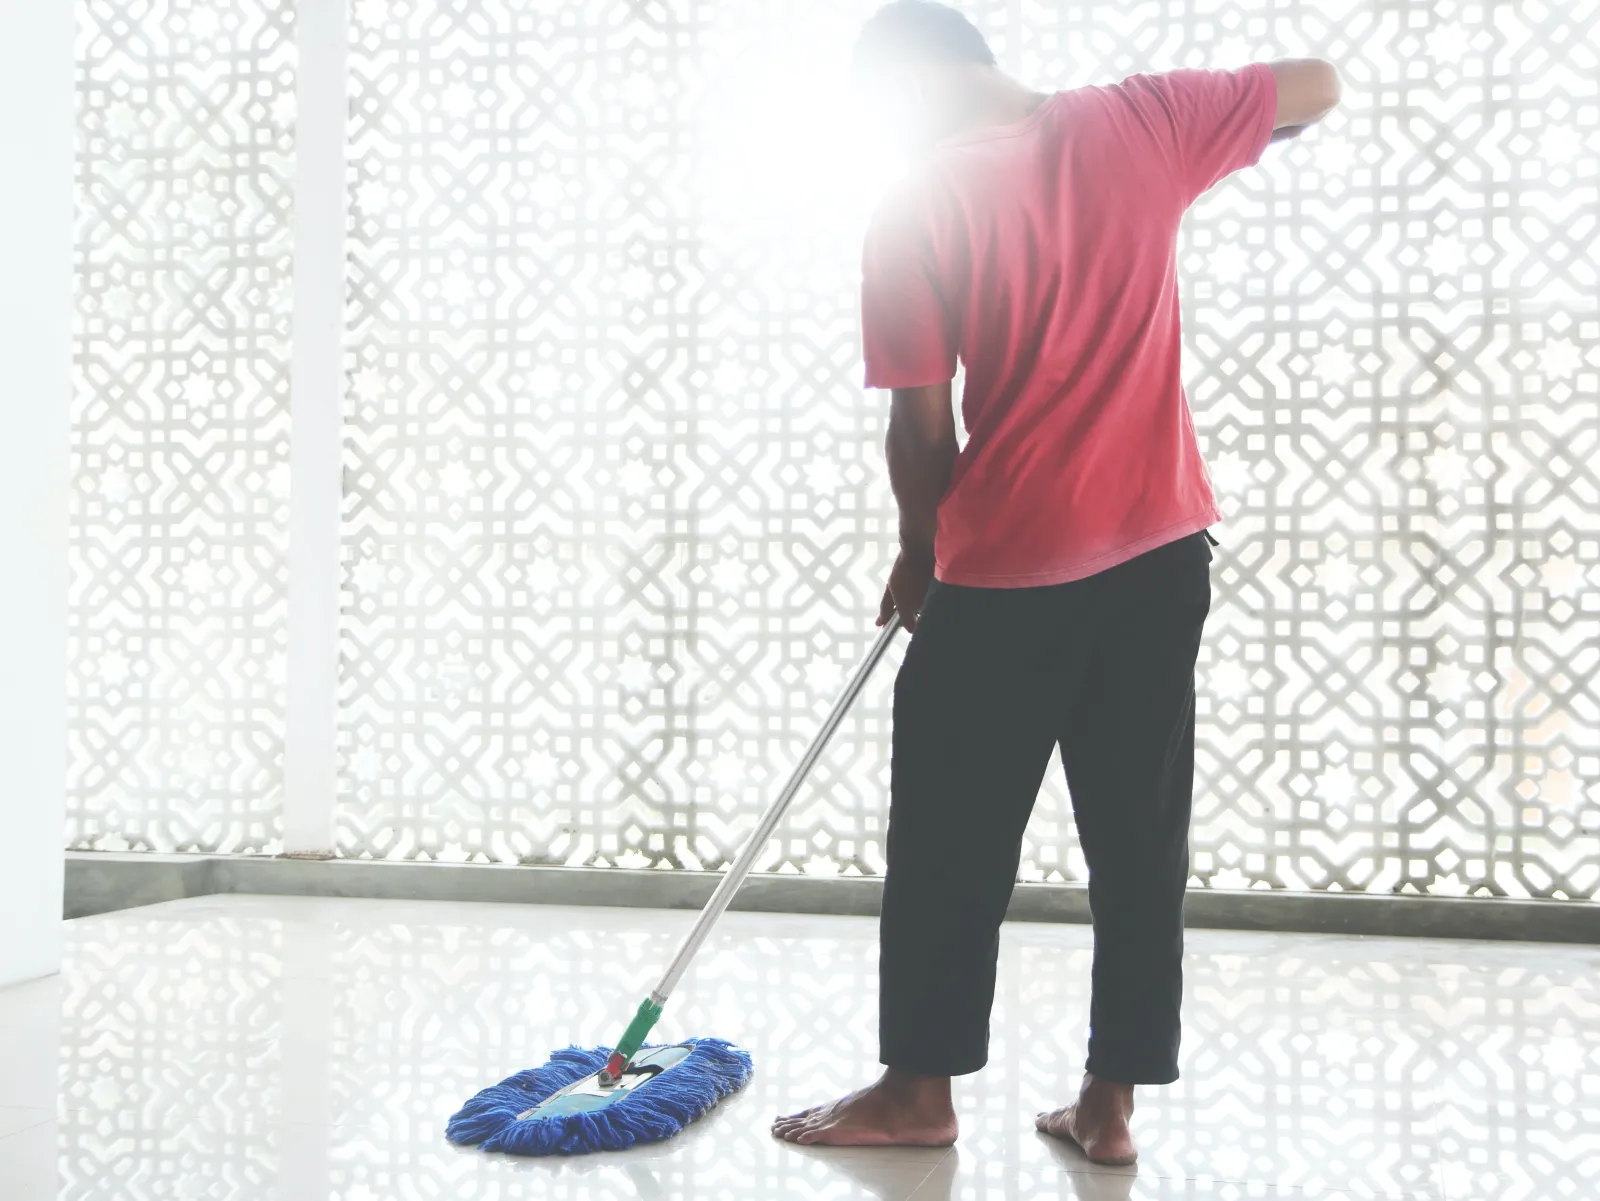 black man mopping floor barefoot with blue mop in a white room